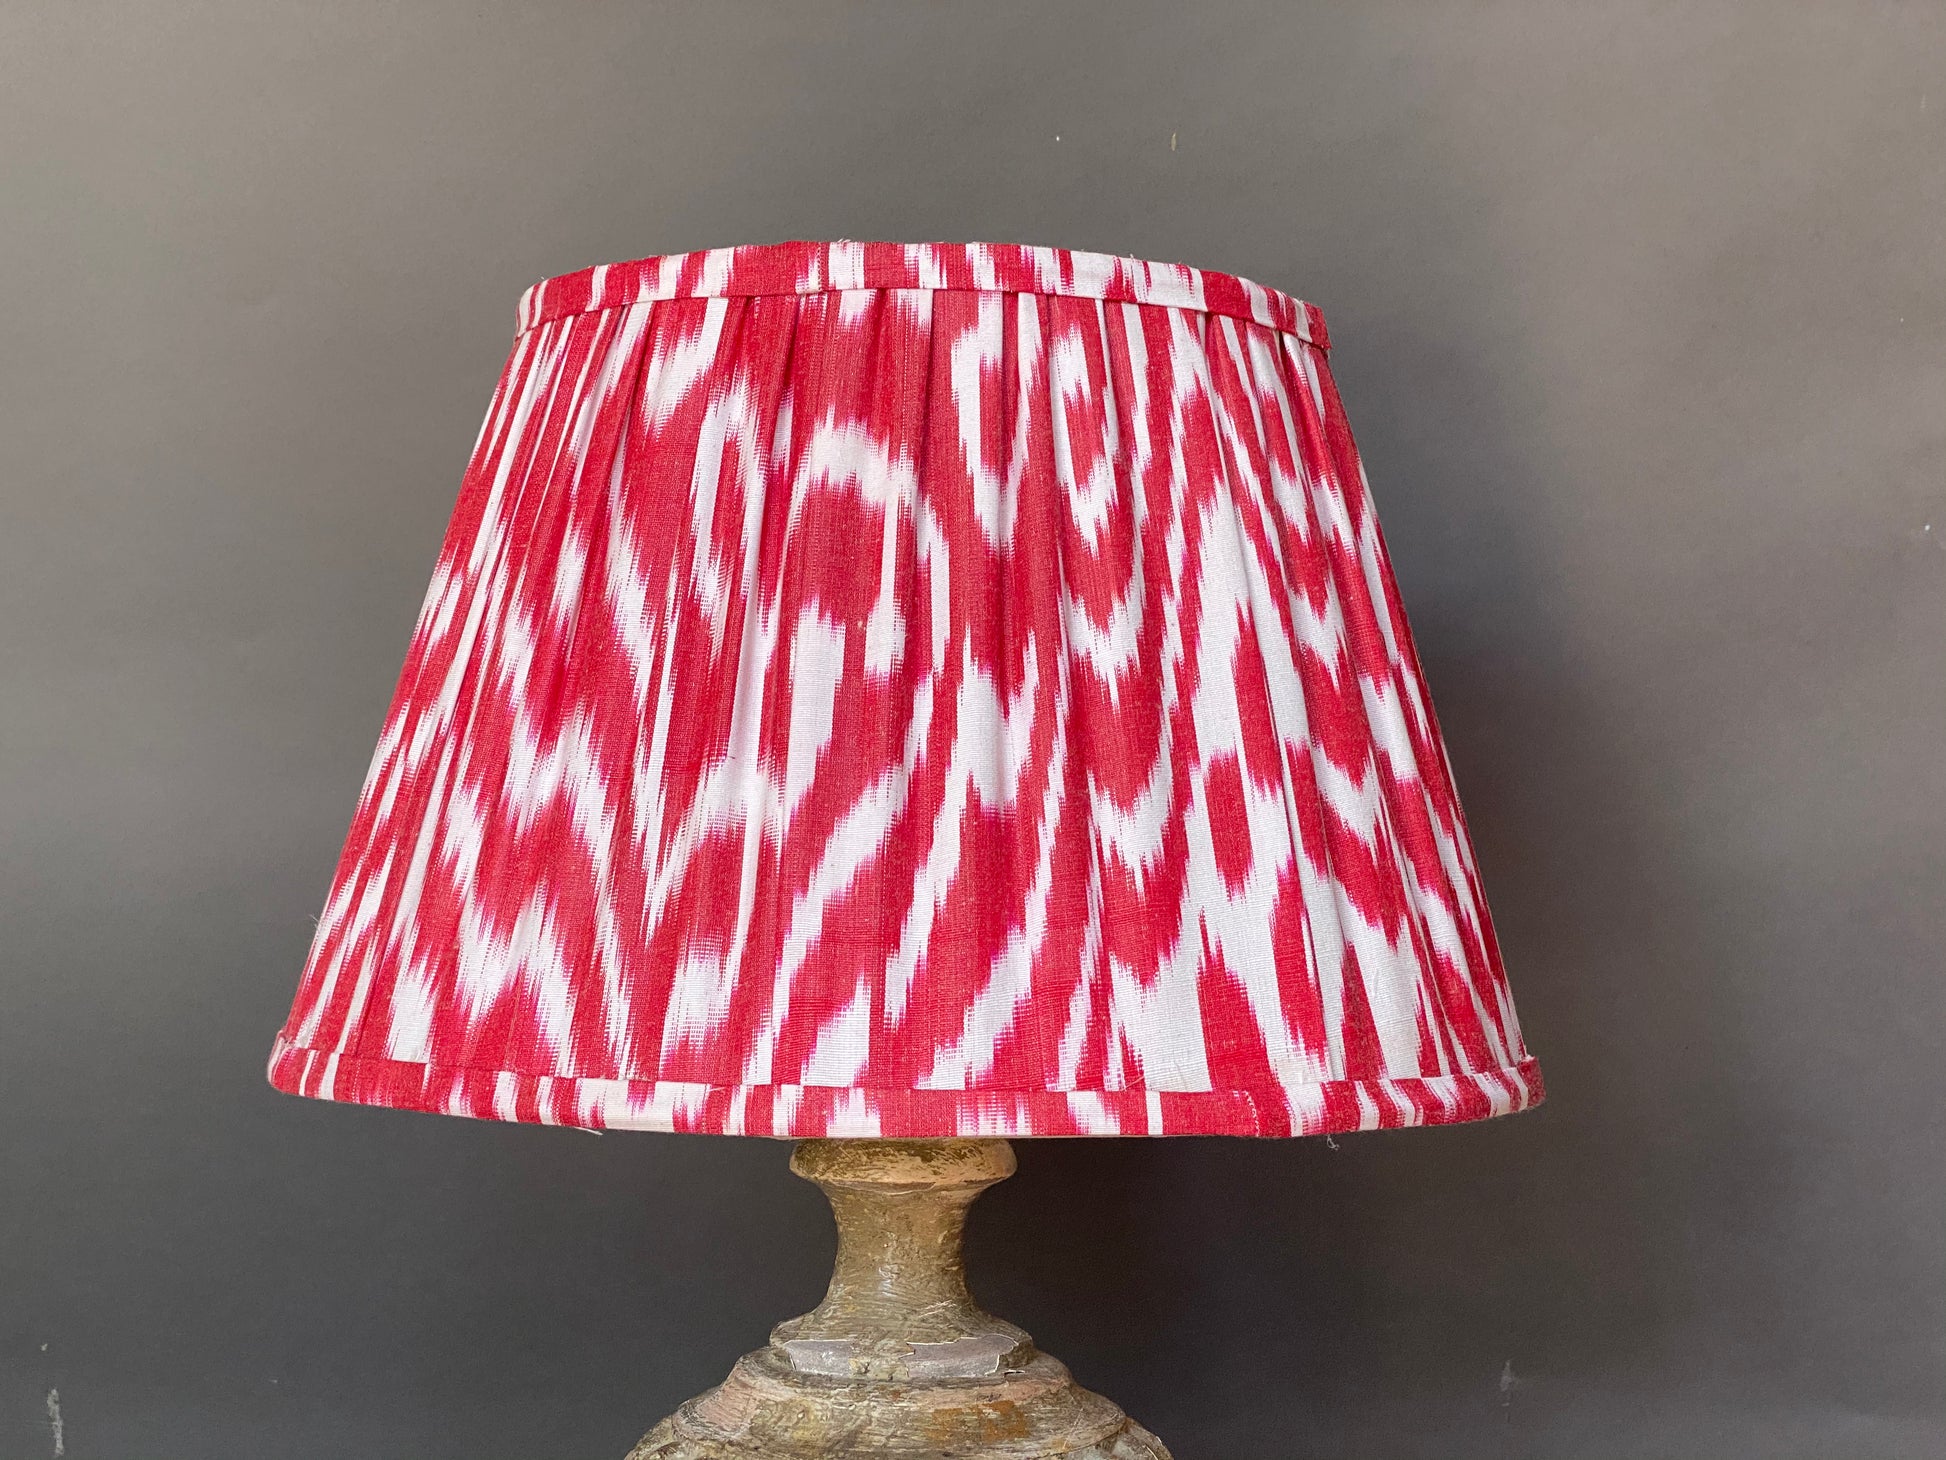 Red and white ikat silk lampshade on a grey background